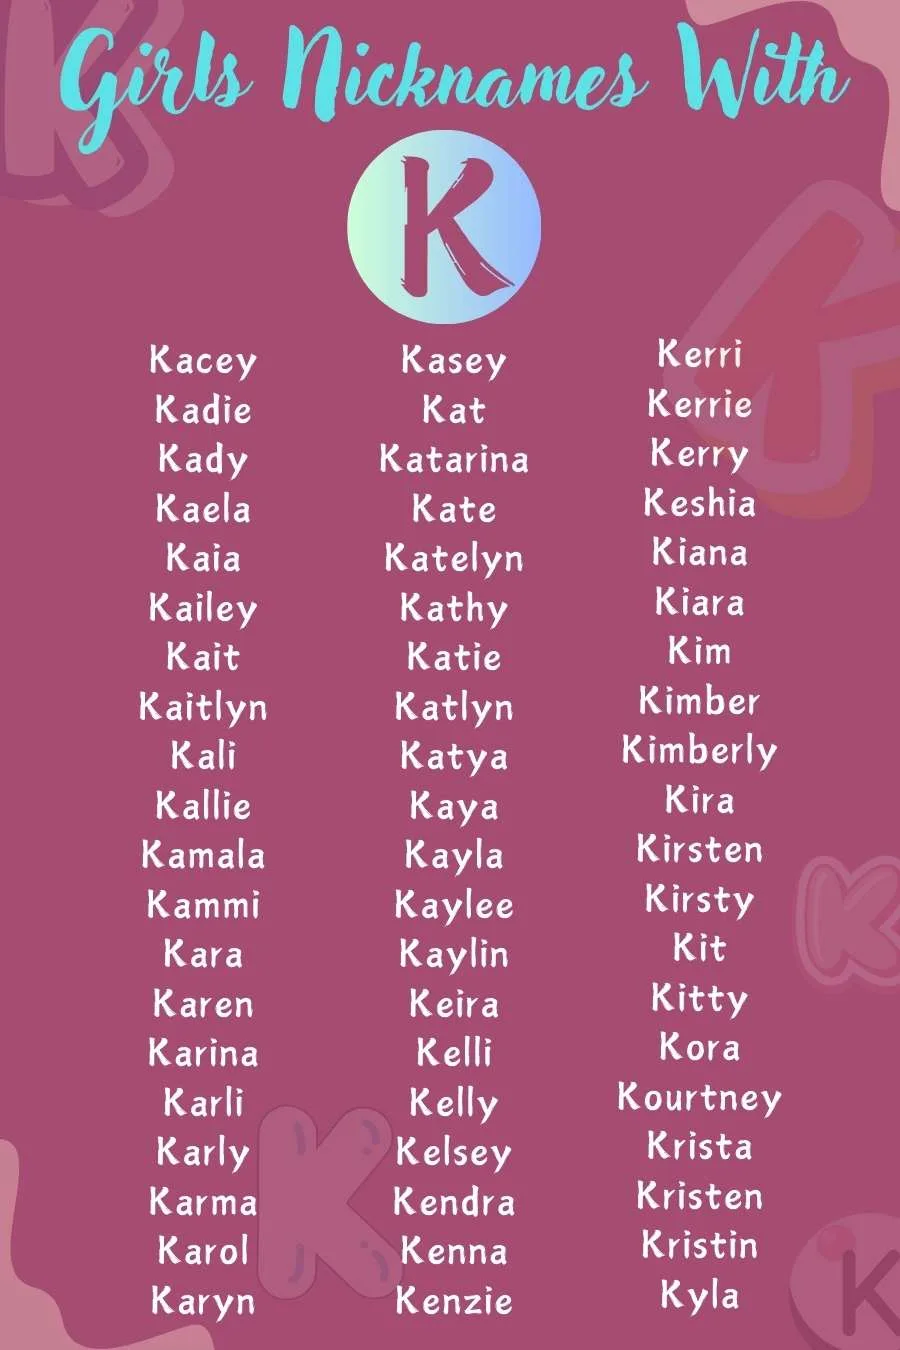 291 Awesome Nicknames with K for Girls with Meaning